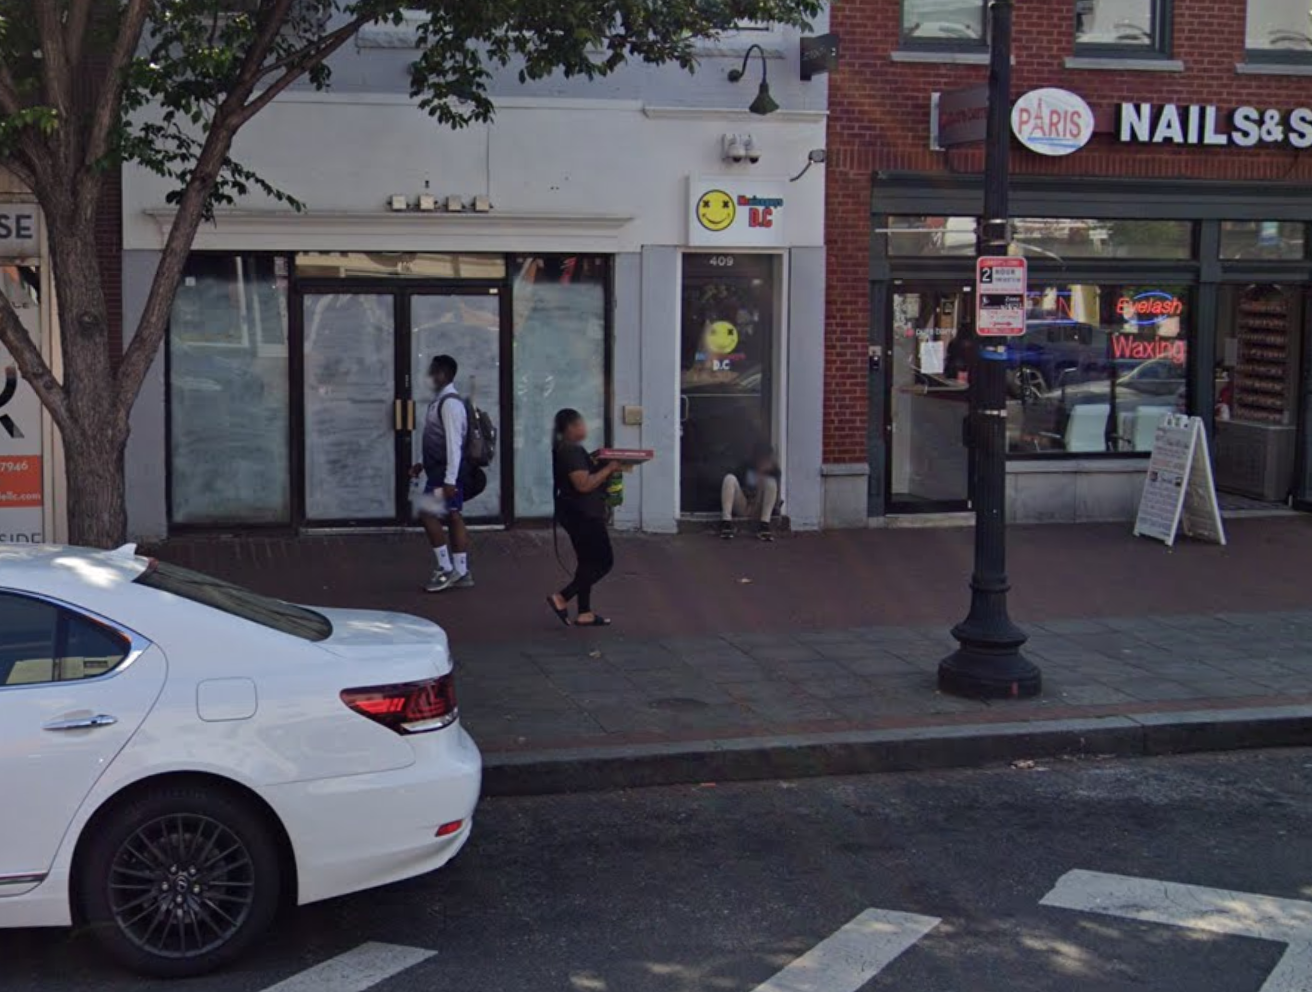 D.C. Cannabis Stores Robbed at Gunpoint on Wednesday, Thousands in Weed and $14k Chain Stolen